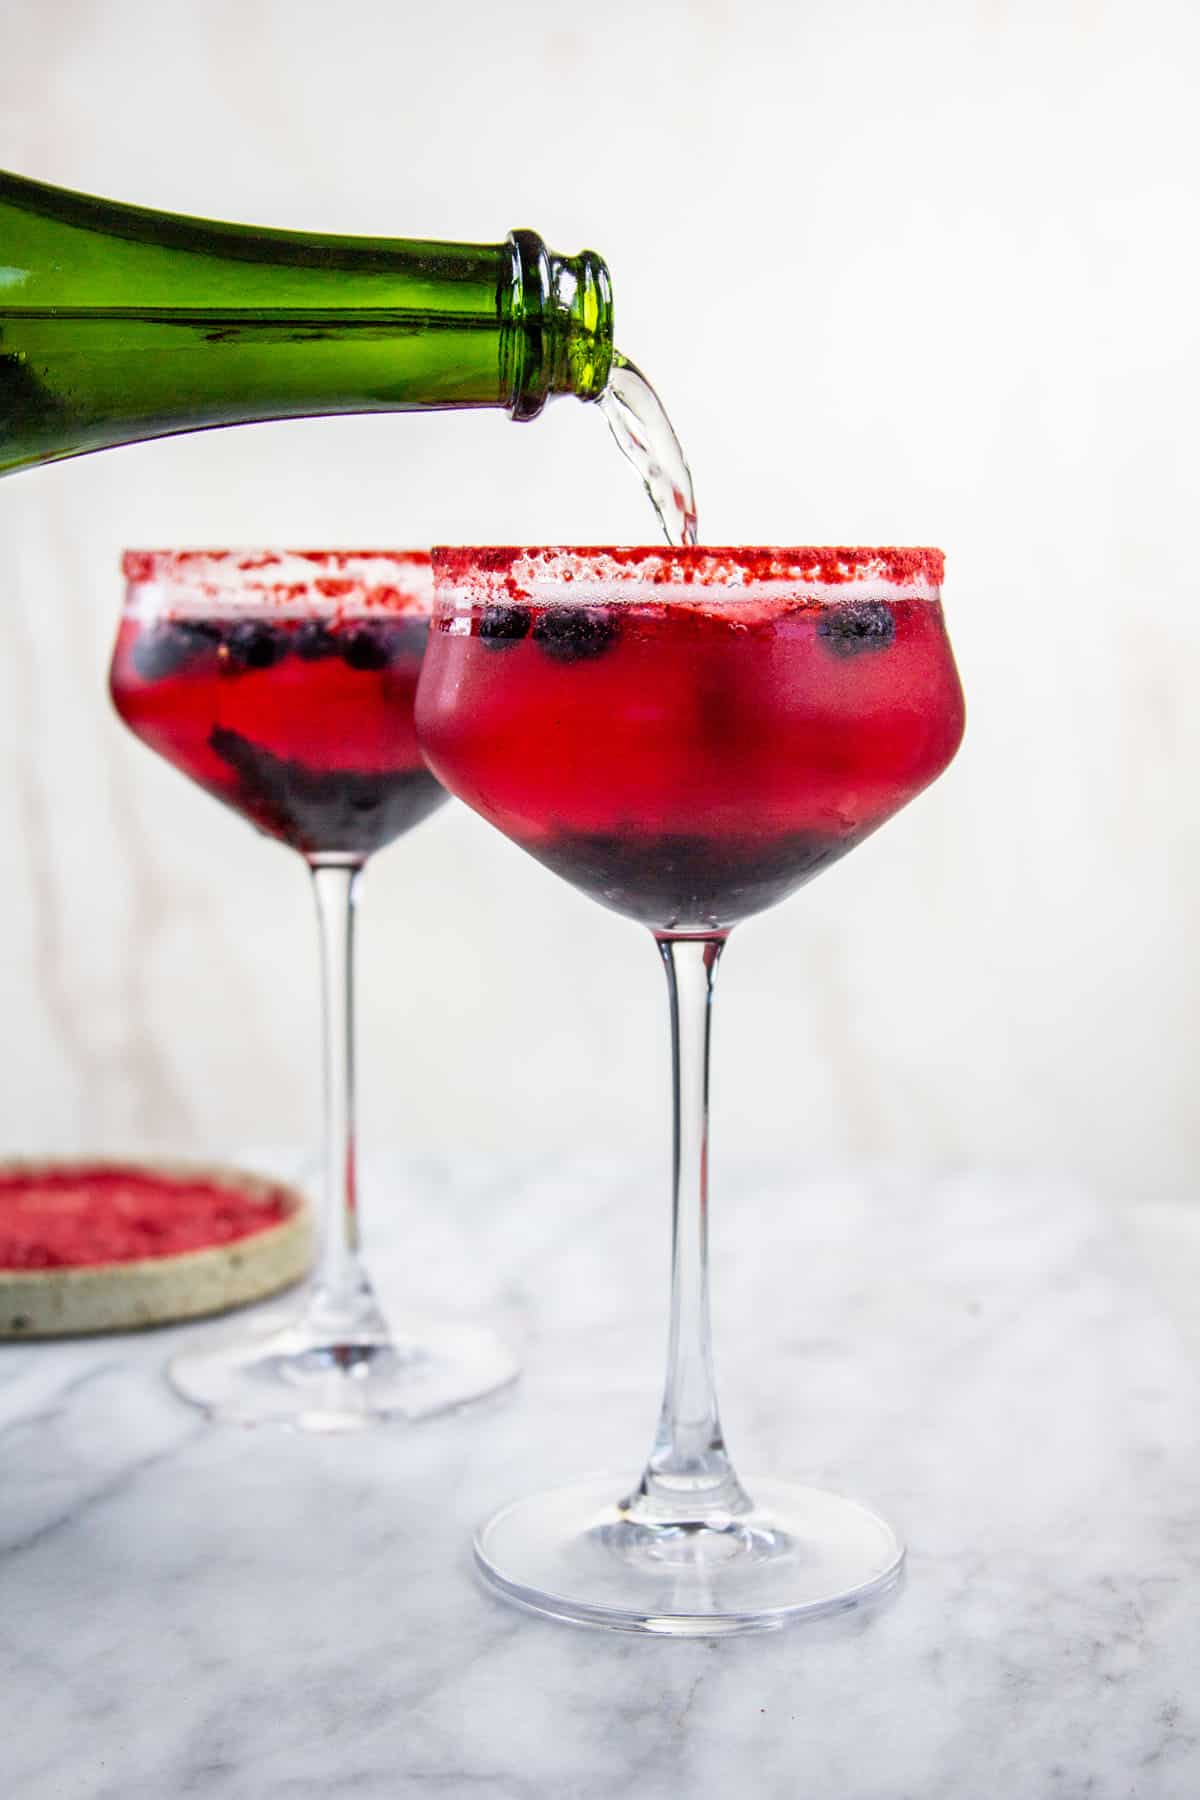 A Simple Blueberry Cocktail Recipe Made with Jam